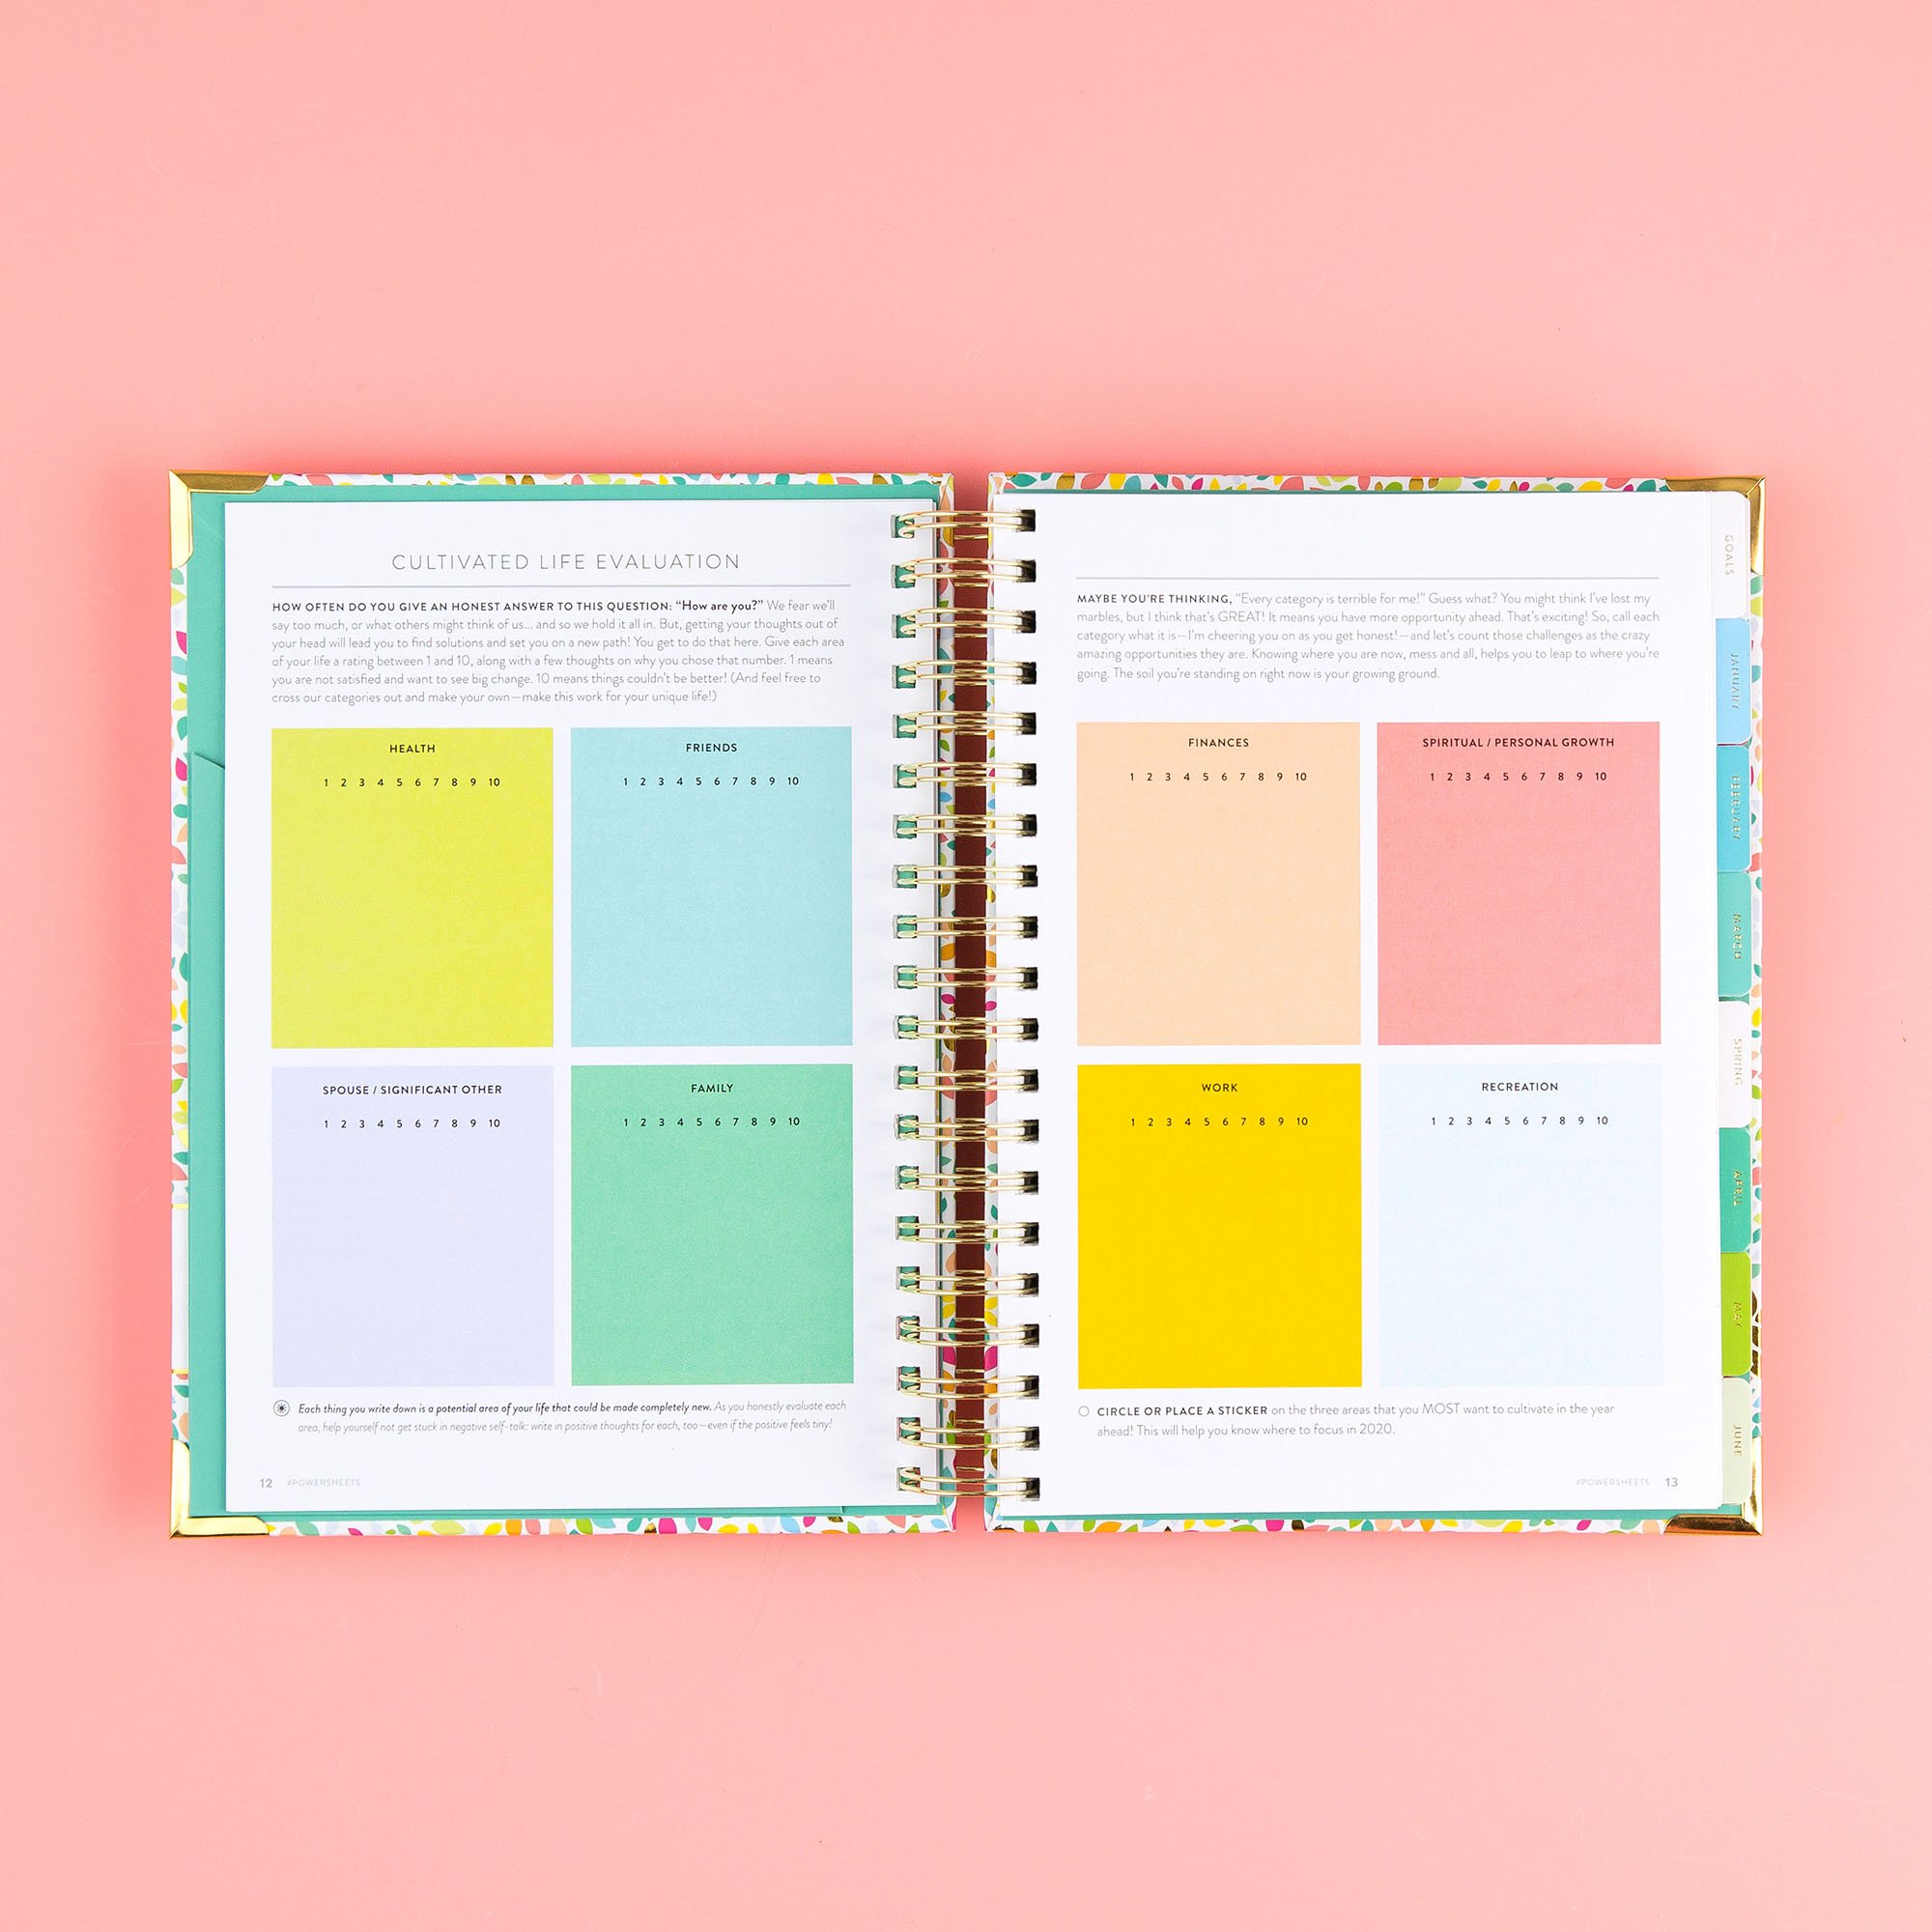 Cultivate What Matters powersheets goal planner on pink background